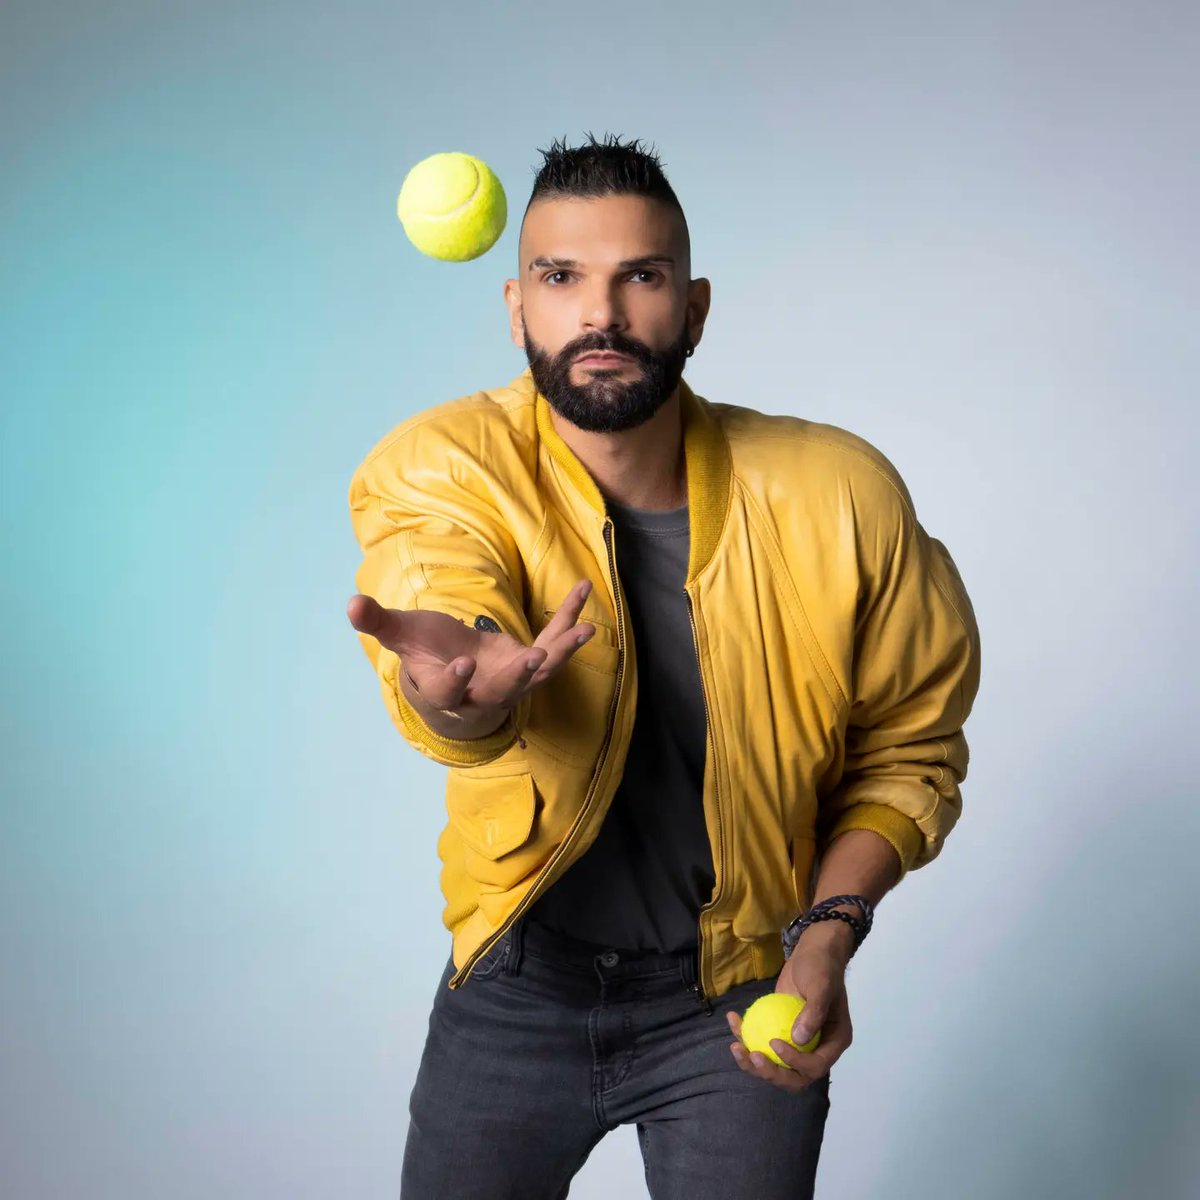 'Imagine a singer holding a tennis ball - both waiting for the perfect moment to strike a chord. Embrace your unique rhythm, and let your heart's song play on. 🎶🎾 #HarmonyInMotion'
#mikemassy
#مايك_ماسي